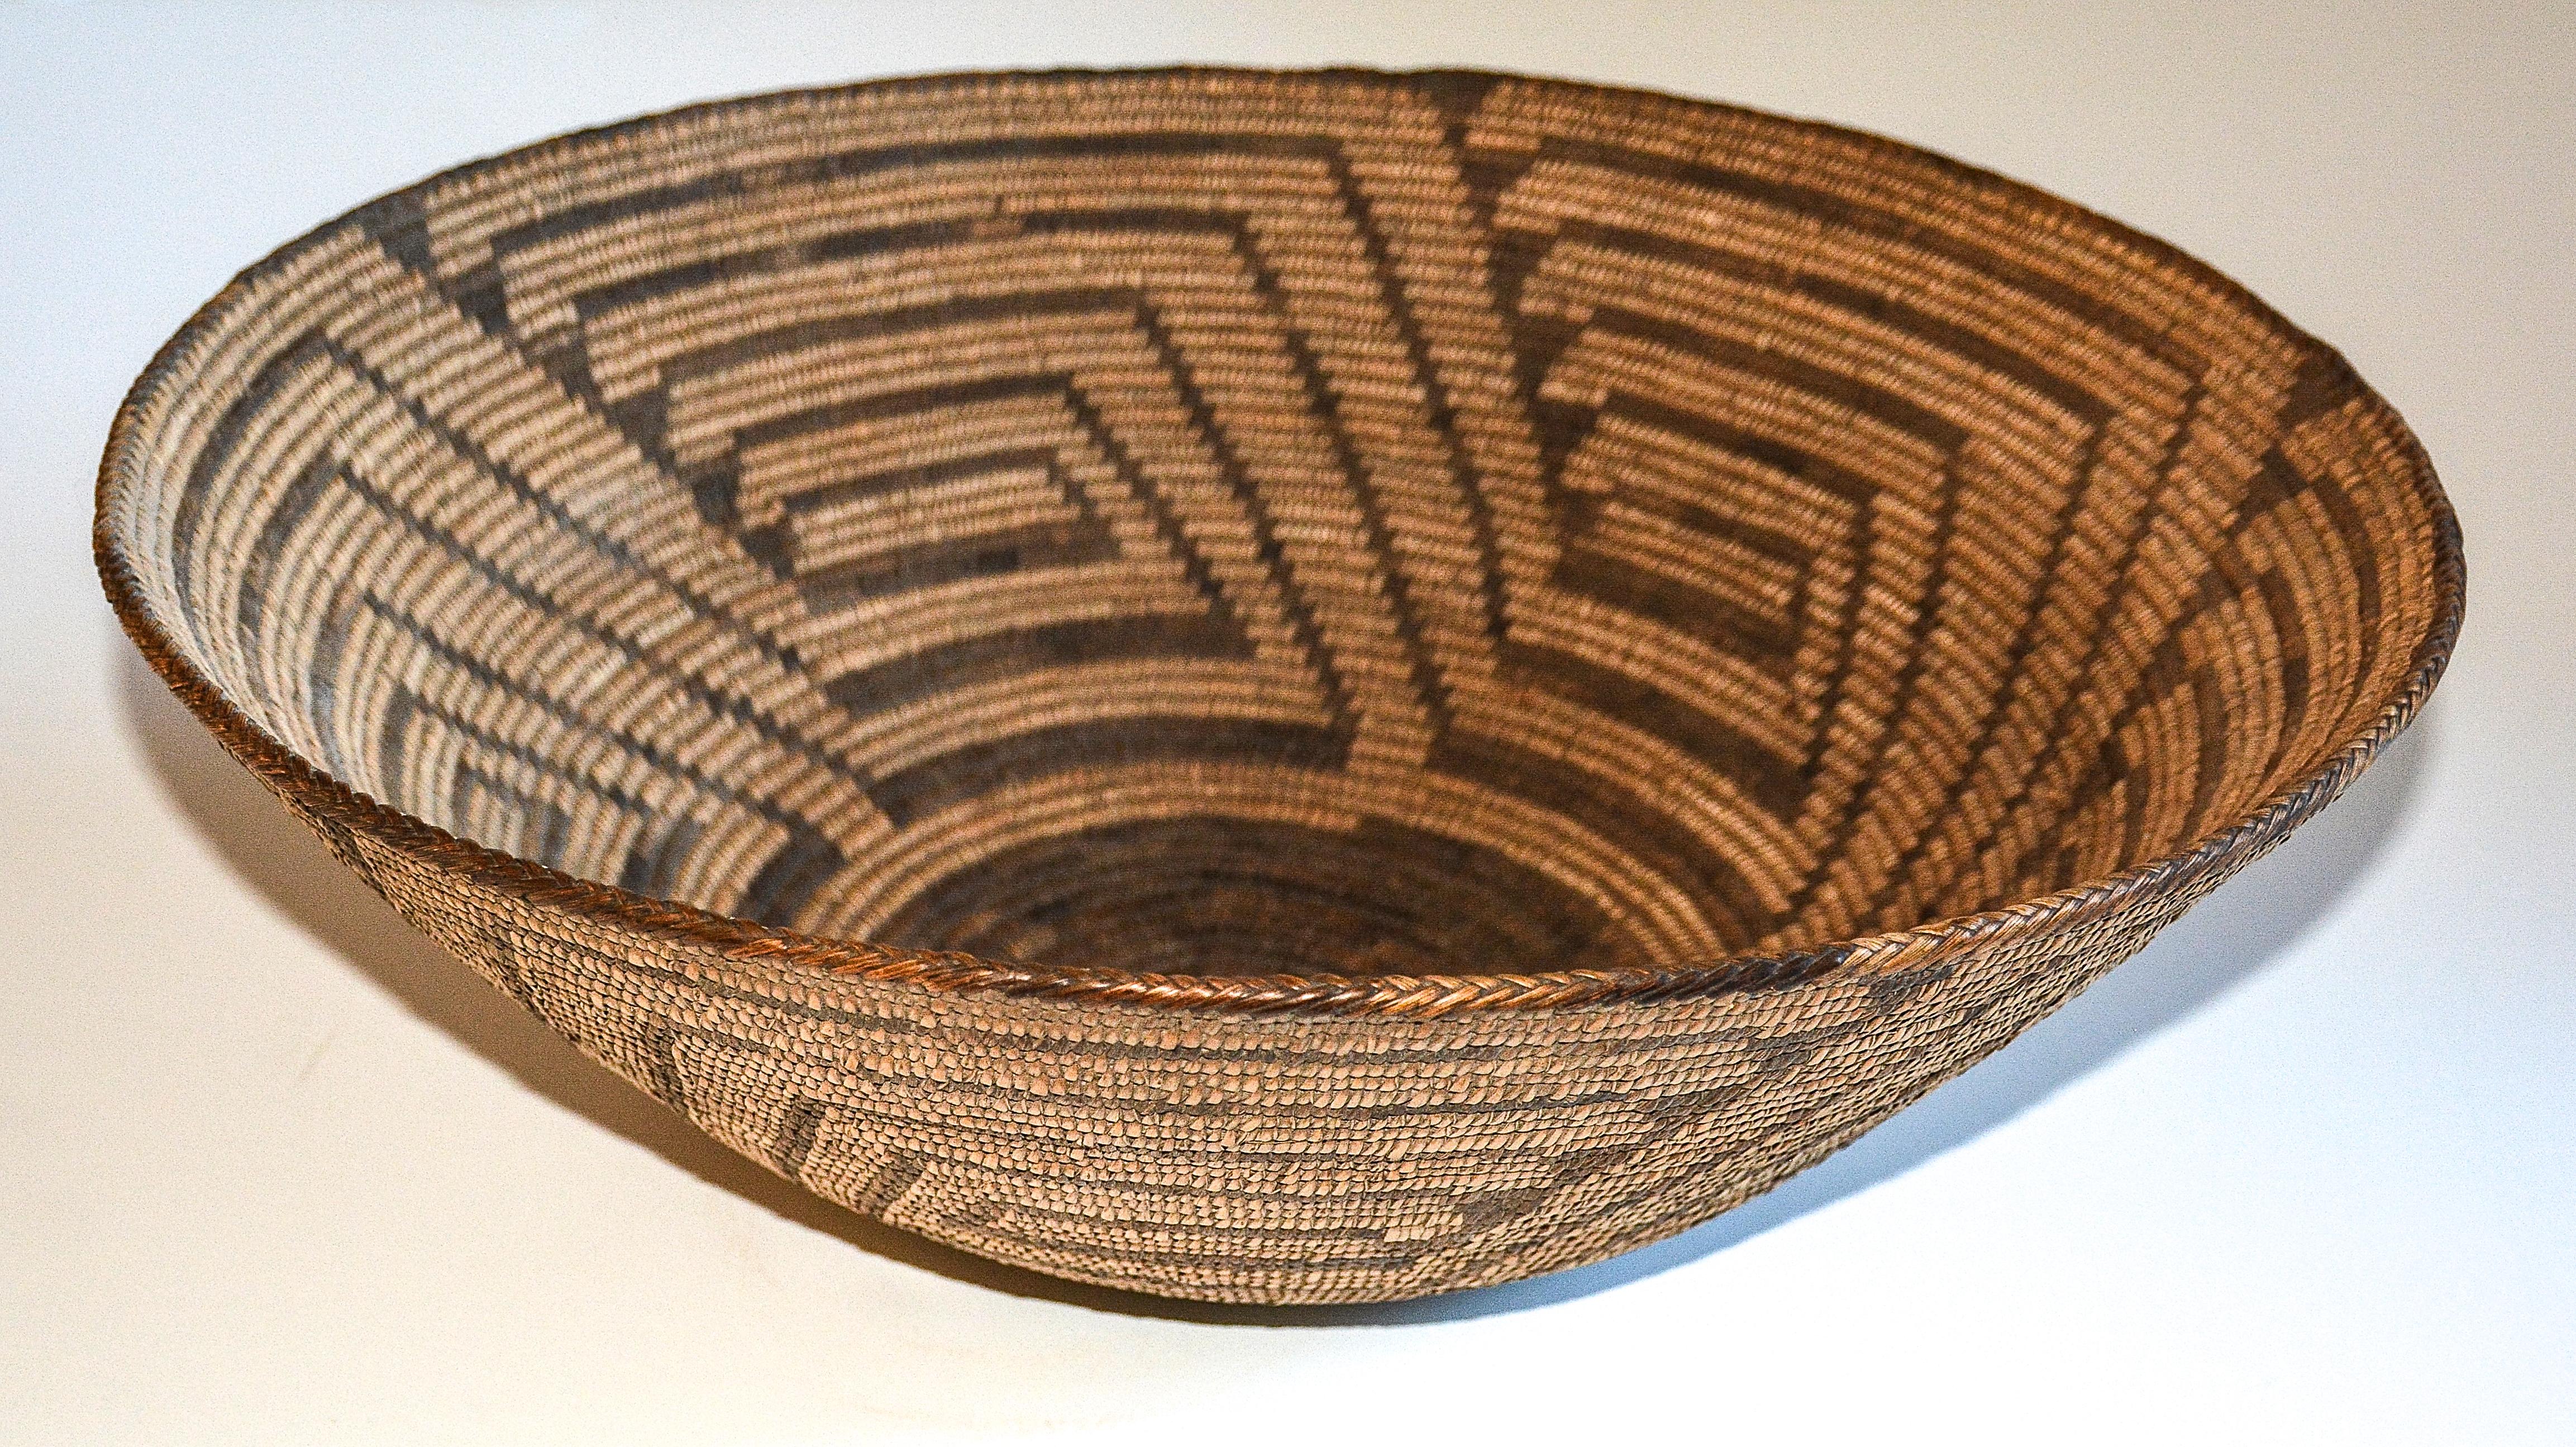 Pima basket
1890
Willow and Devil's Claw
Measures: 6.25 inches Height. x 17 inches in Diameter

This large example of a coiled Pima basket dates from 1890.

 The basket appears in excellent original condition with no restoration and an even